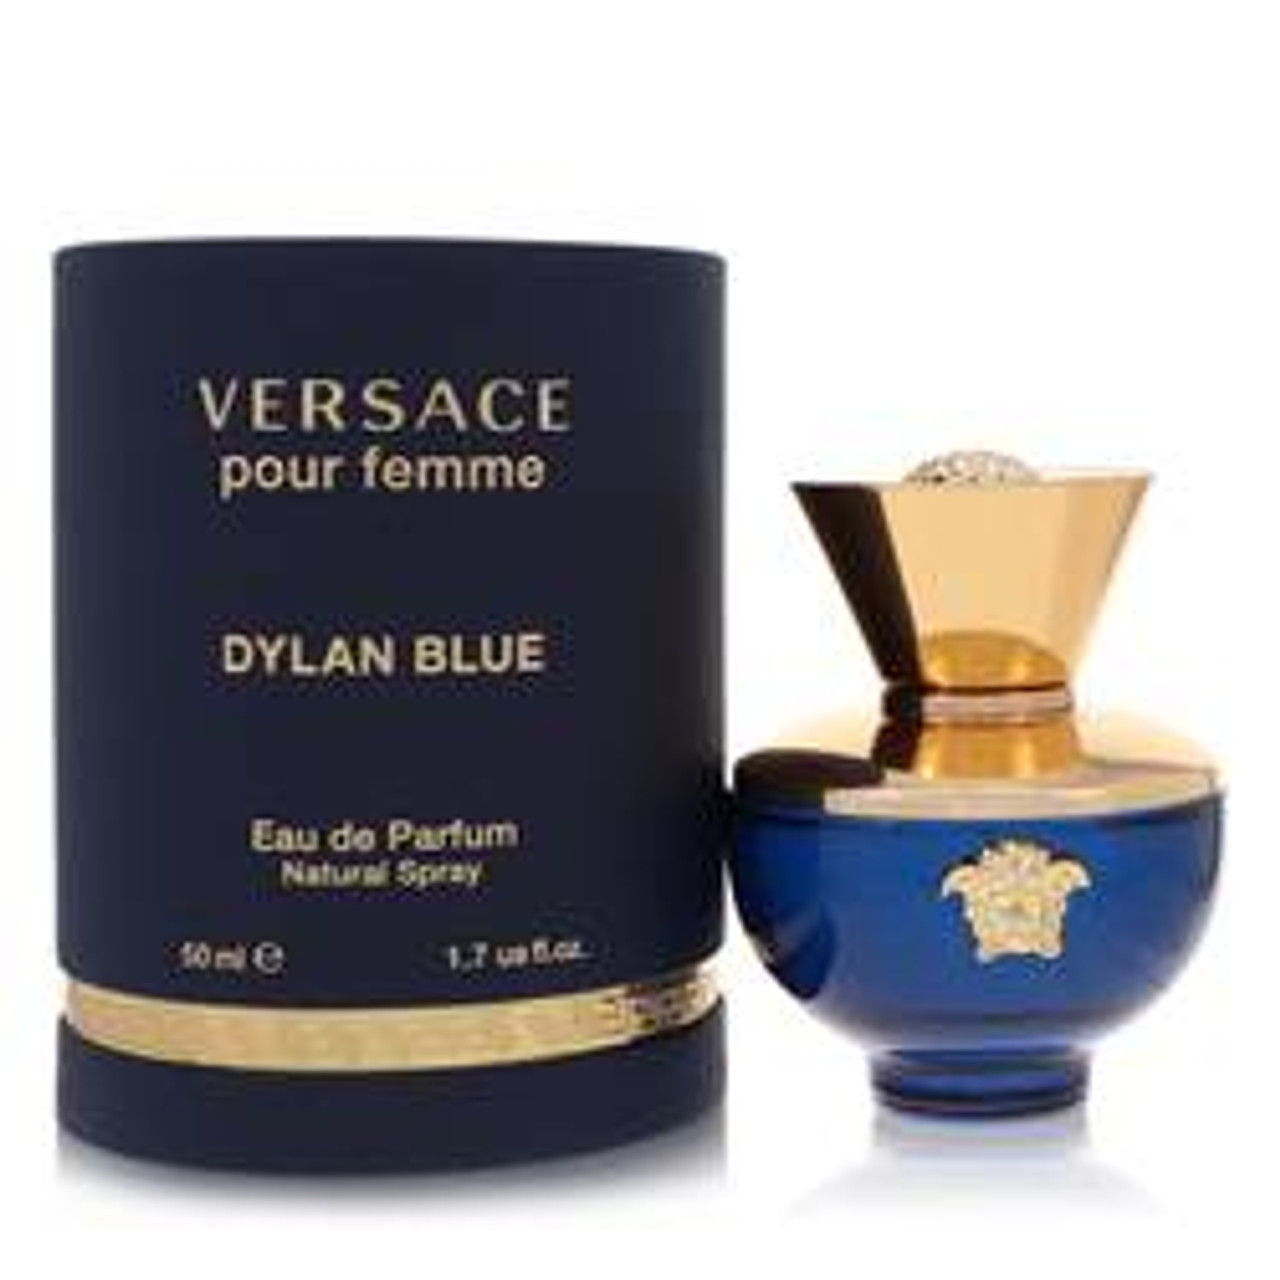 Versace Pour Femme Dylan Blue Perfume By Versace Eau De Parfum Spray 1.7 oz for Women - [From 124.00 - Choose pk Qty ] - *Ships from Miami